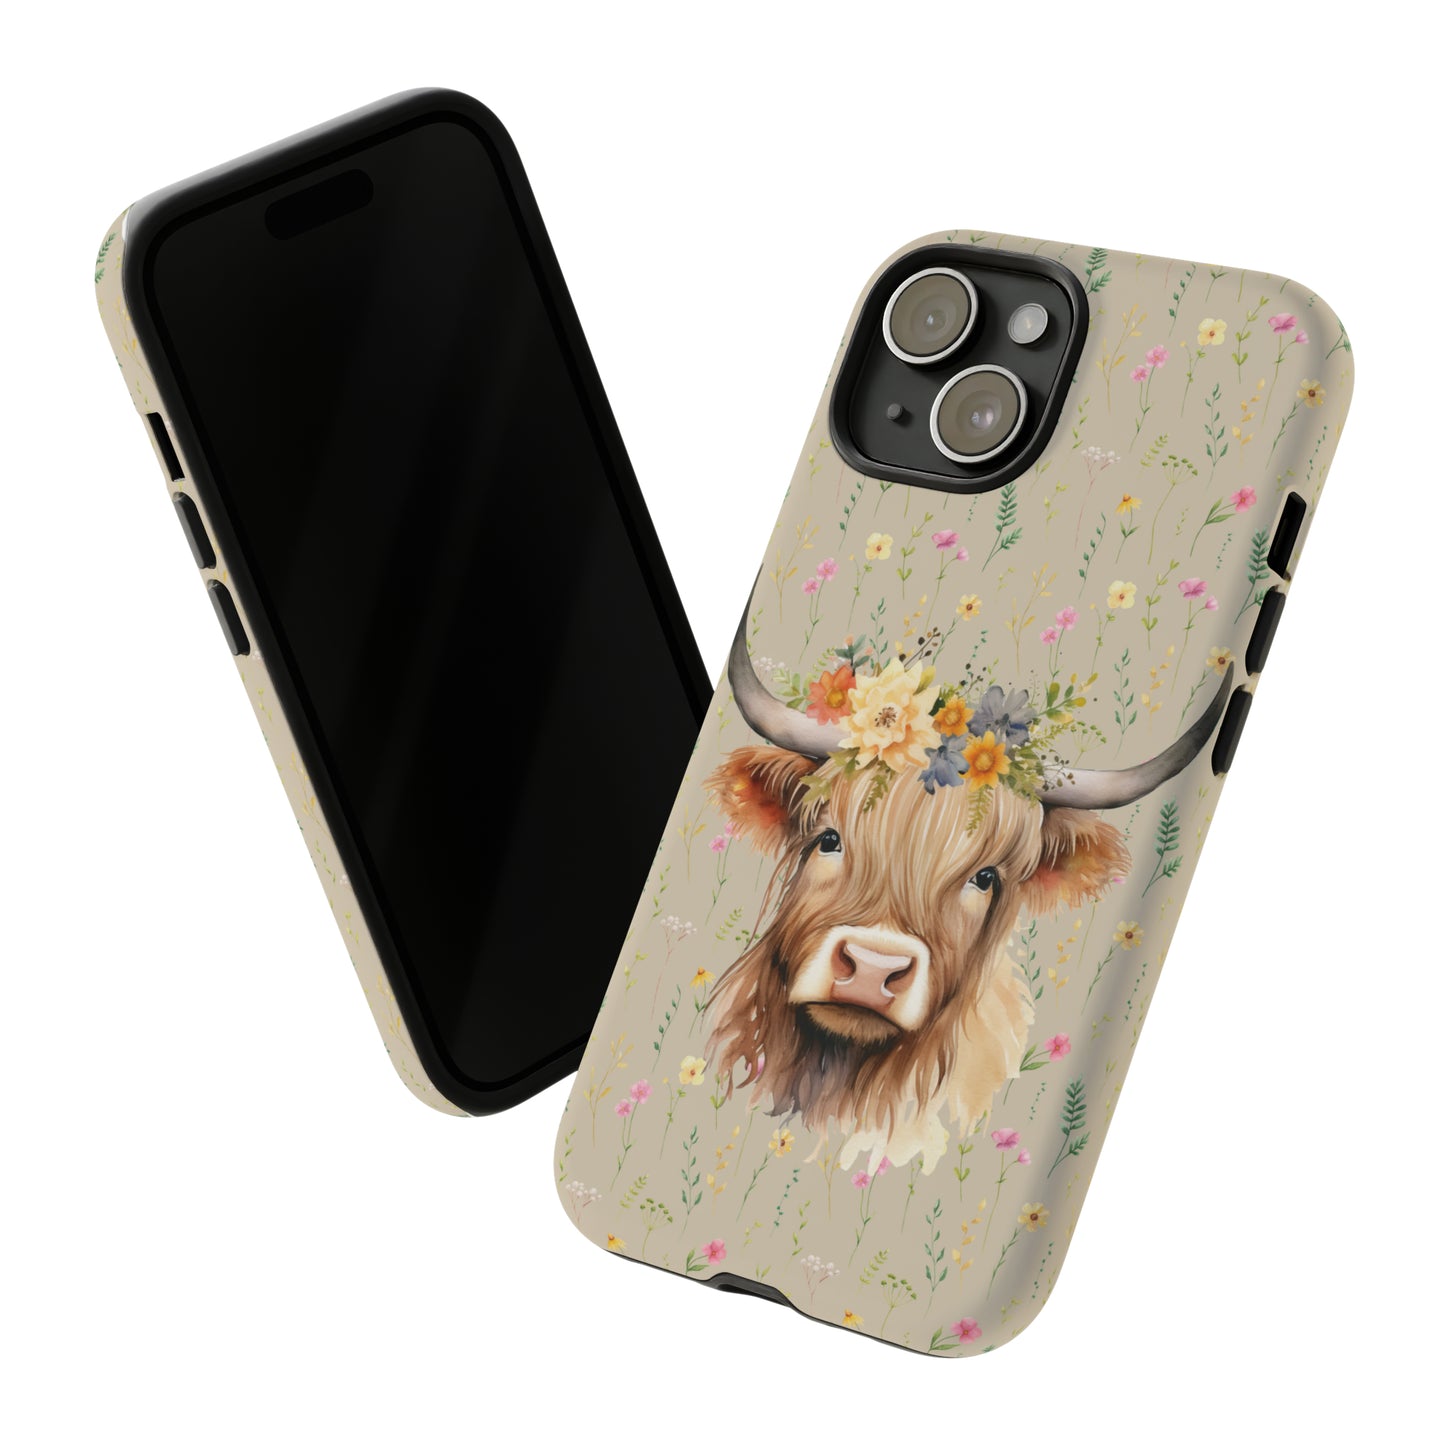 Highland Cow and Flowers - Unique Phone Case Design - Tough Cases - Cow Lover Gift - Cute Phone Case